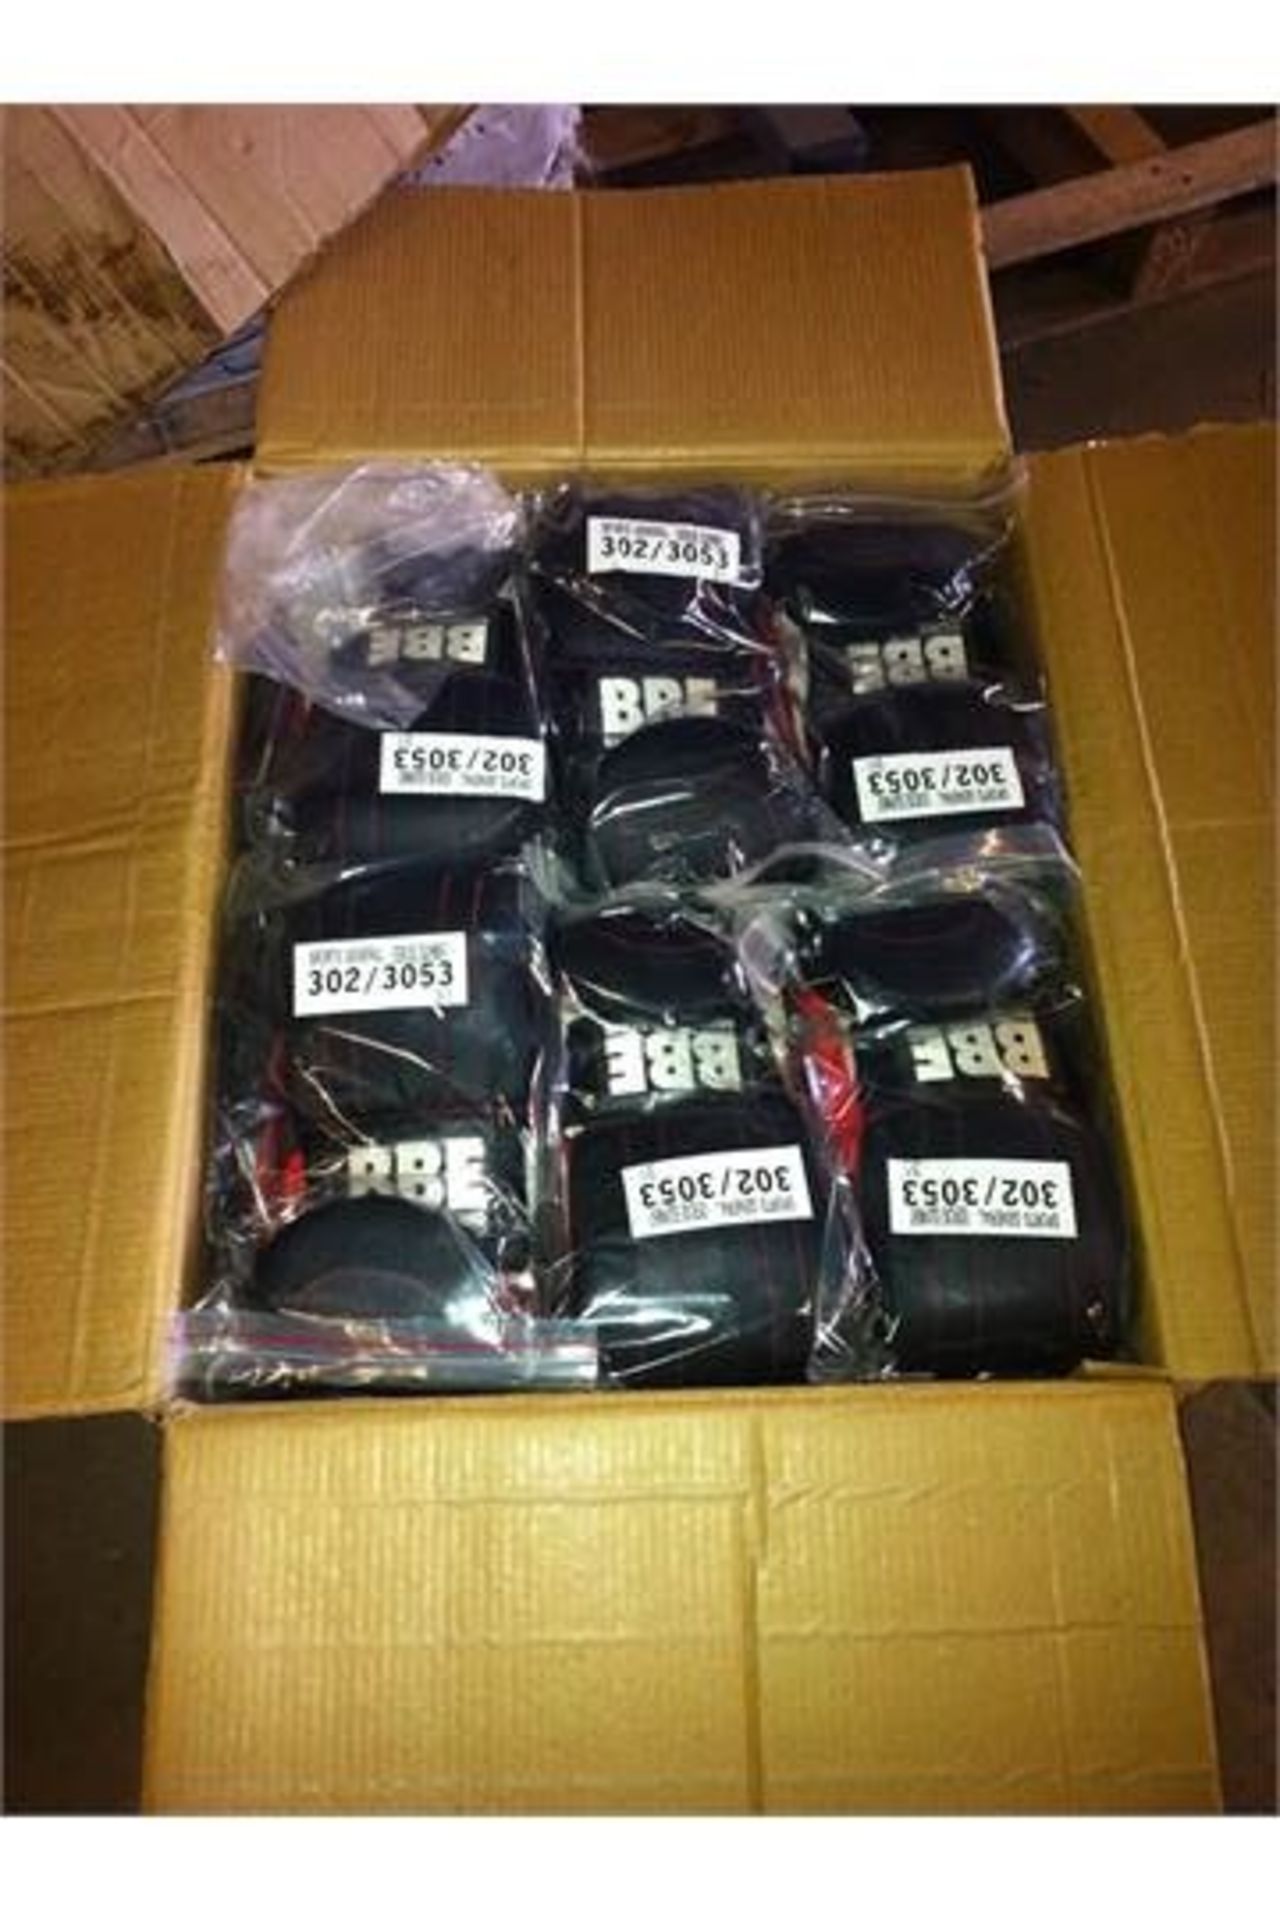 40 x Pairs of BBE Boxing Gloves - Image 2 of 2